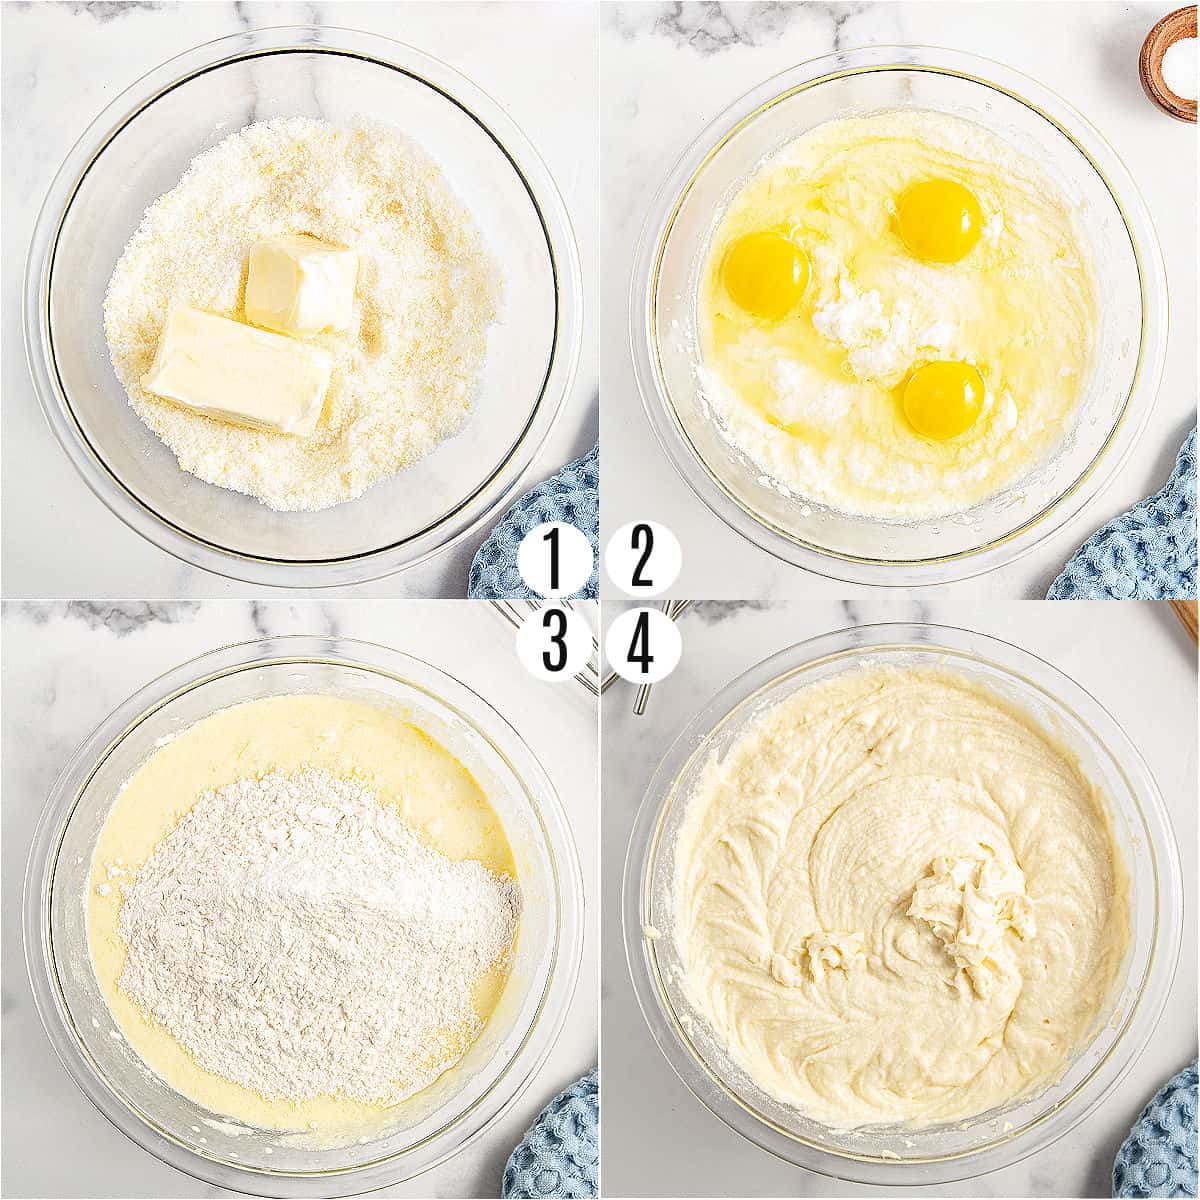 Step by step photos showing how to make lemon ricotta cake.